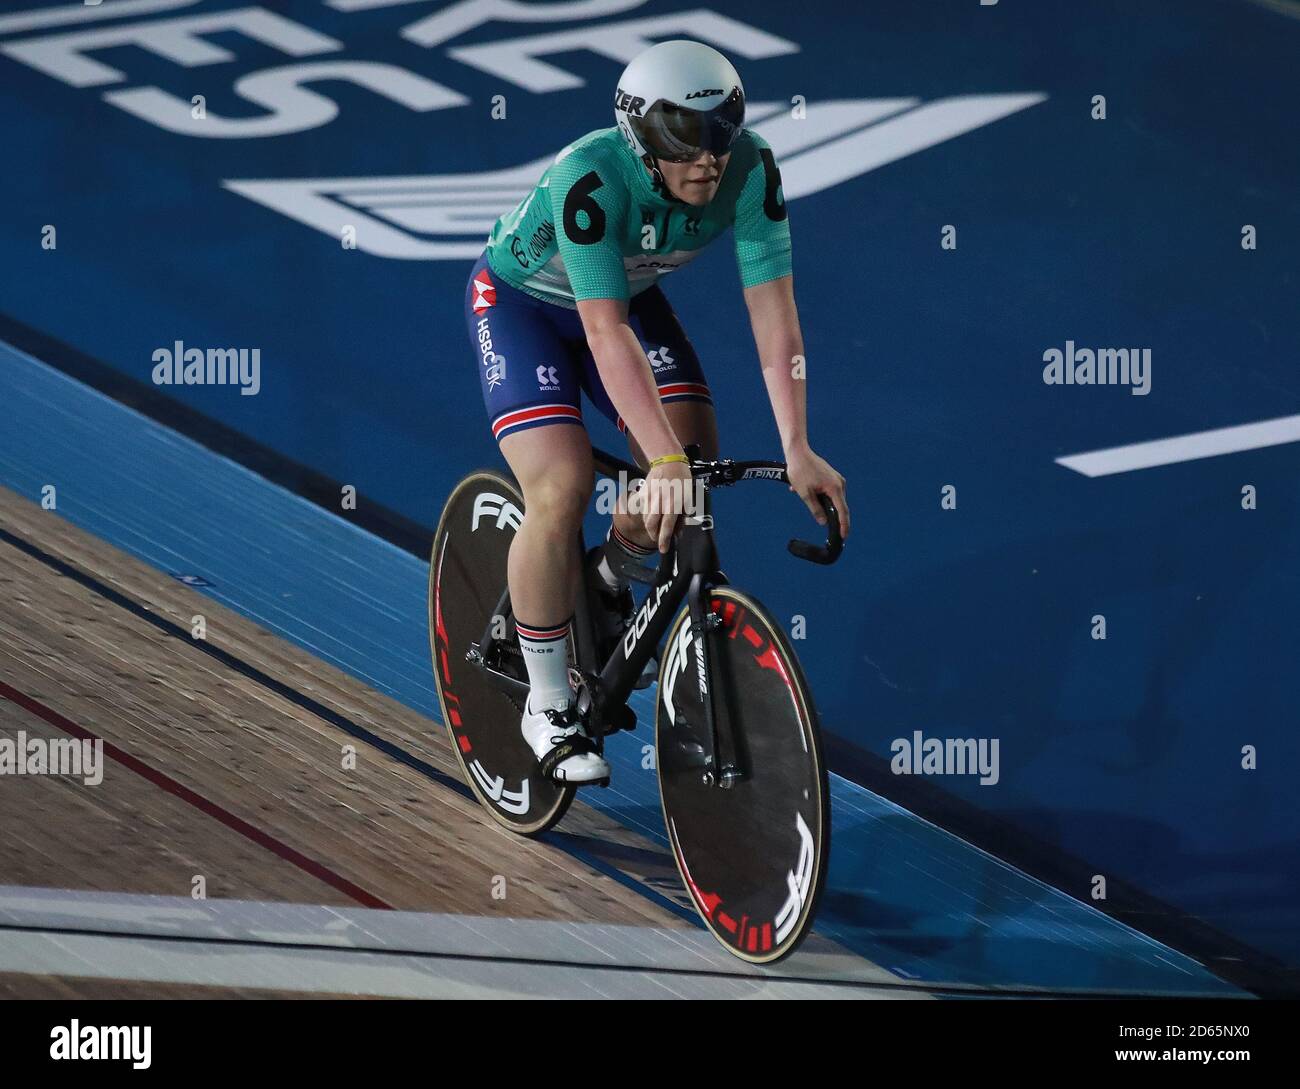 James Bunting during day one of the Phynova Six Day Cycling at Lee Valley VeloPark, London. Stock Photo